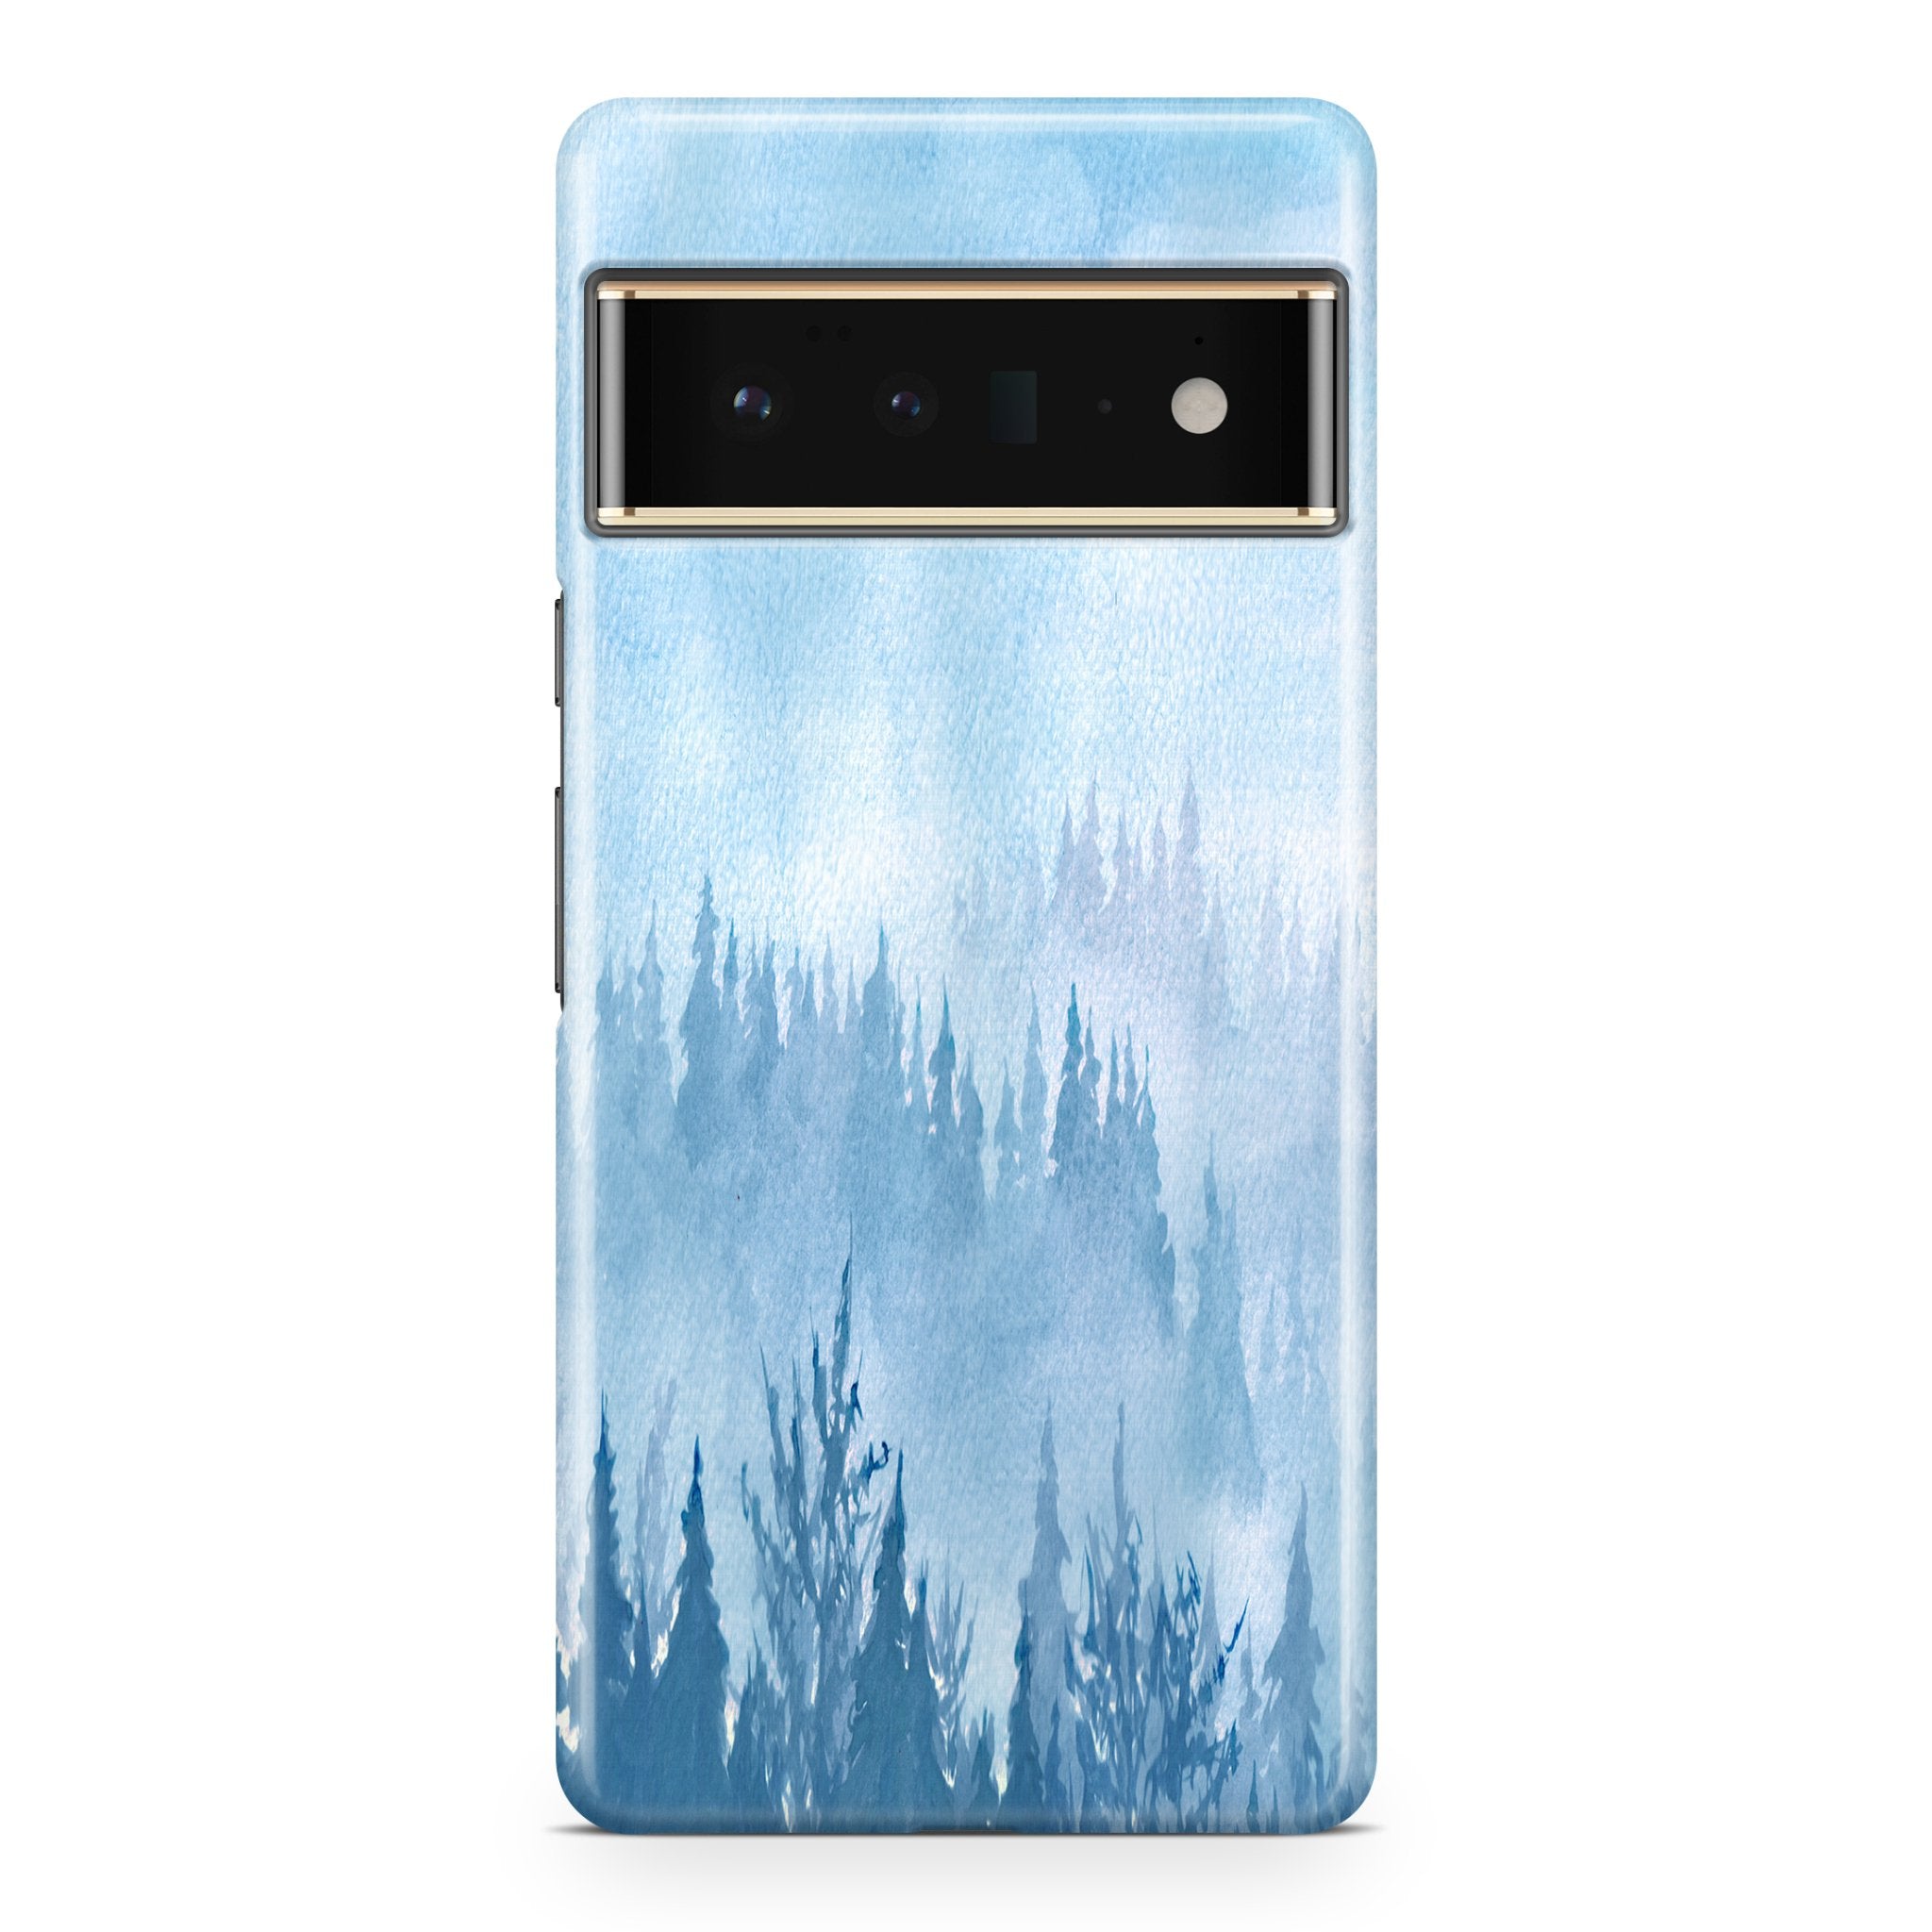 Foggy Blue - Google phone case designs by CaseSwagger